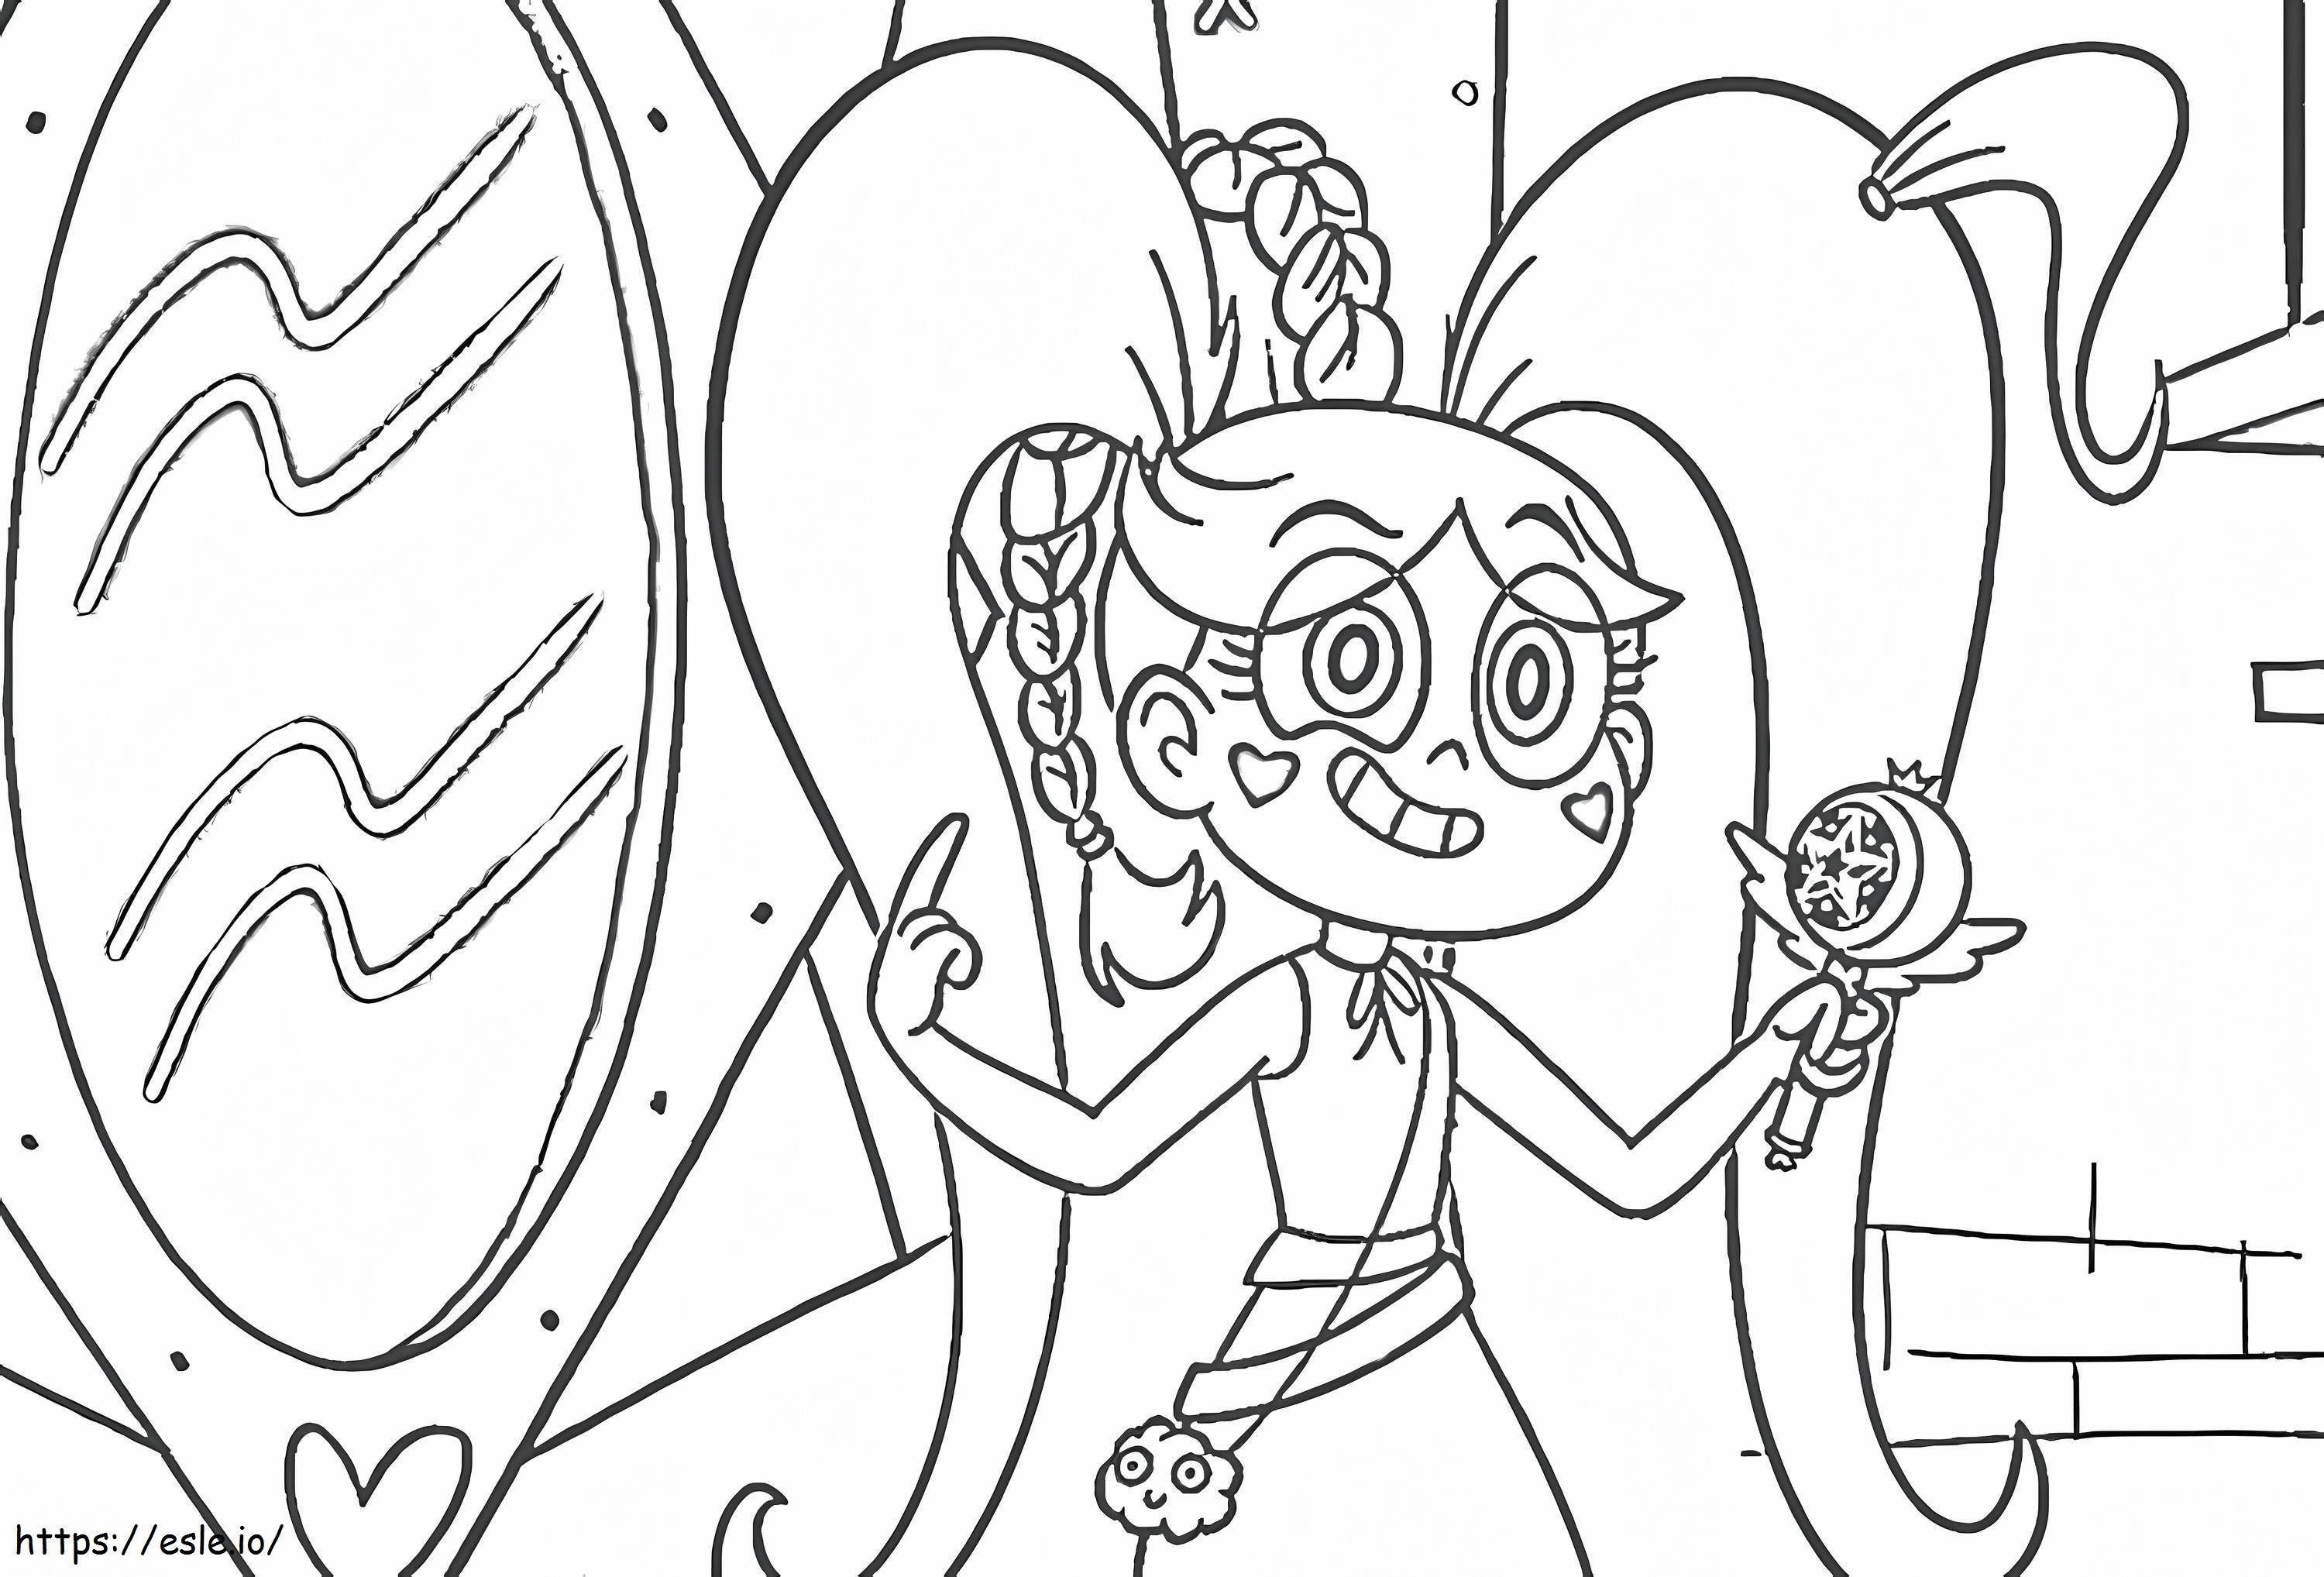 Star Butterfly 1 coloring page